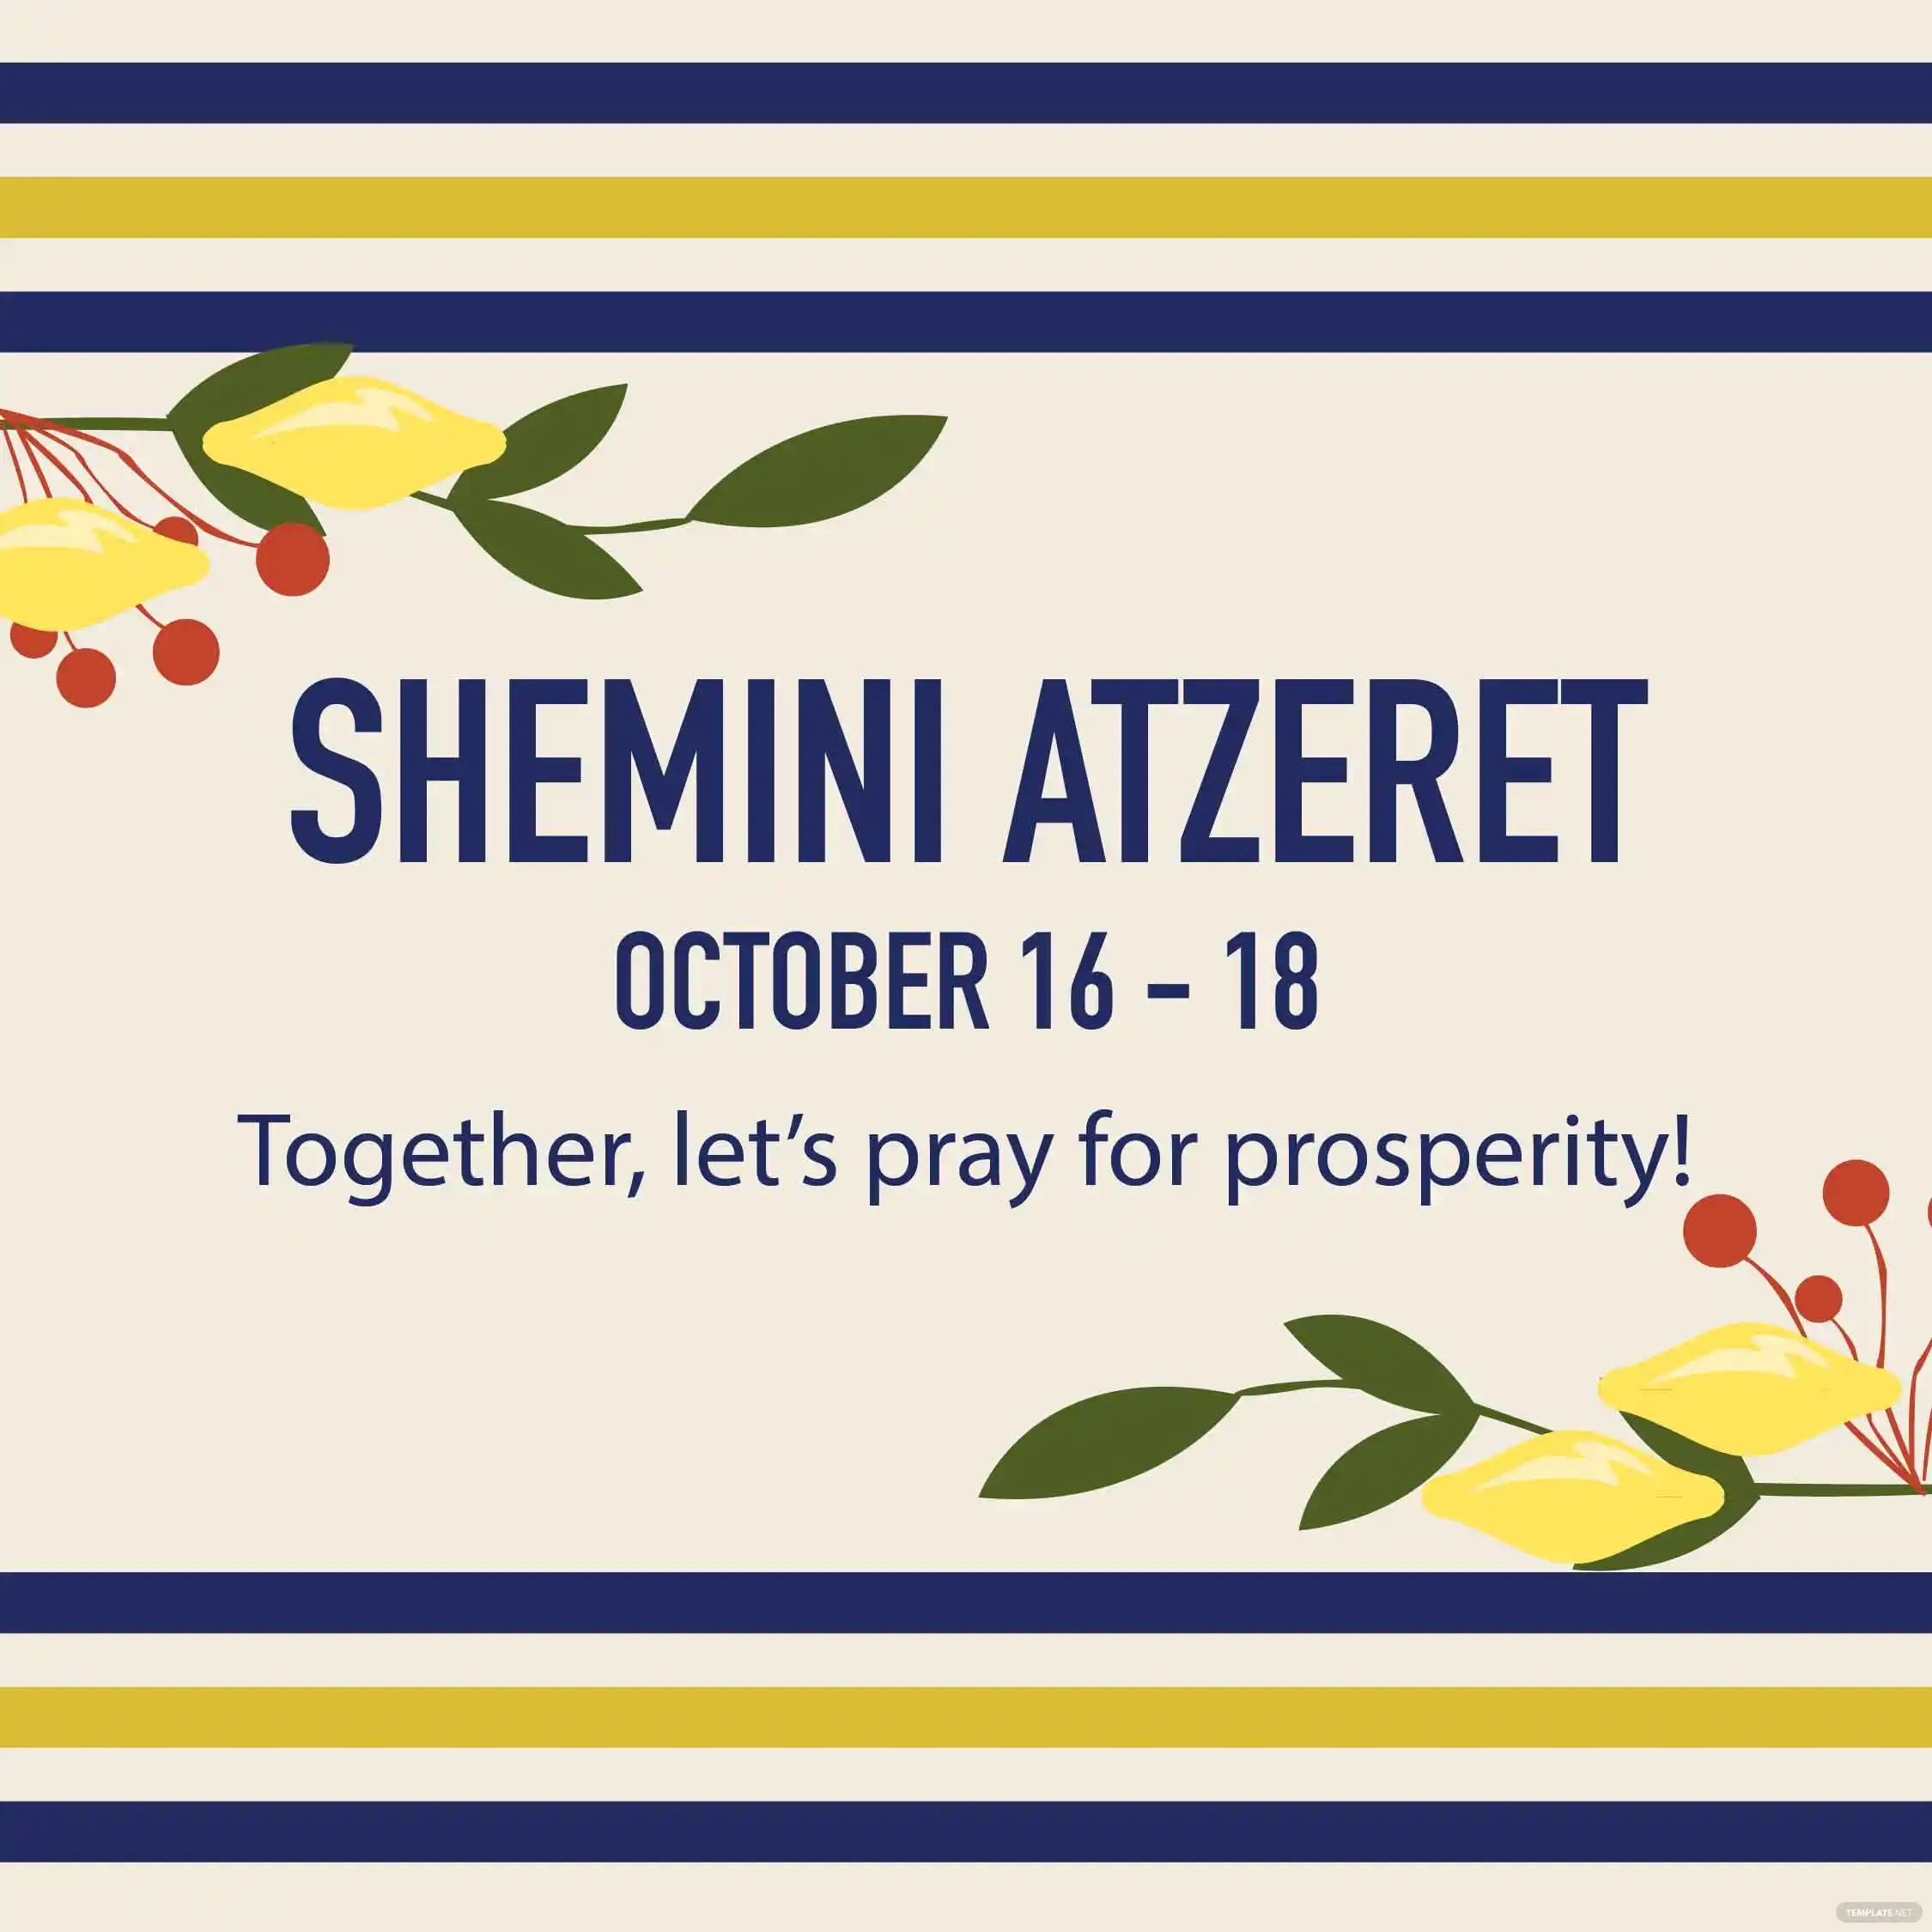 shemini atzeret instagram post ideas and examples